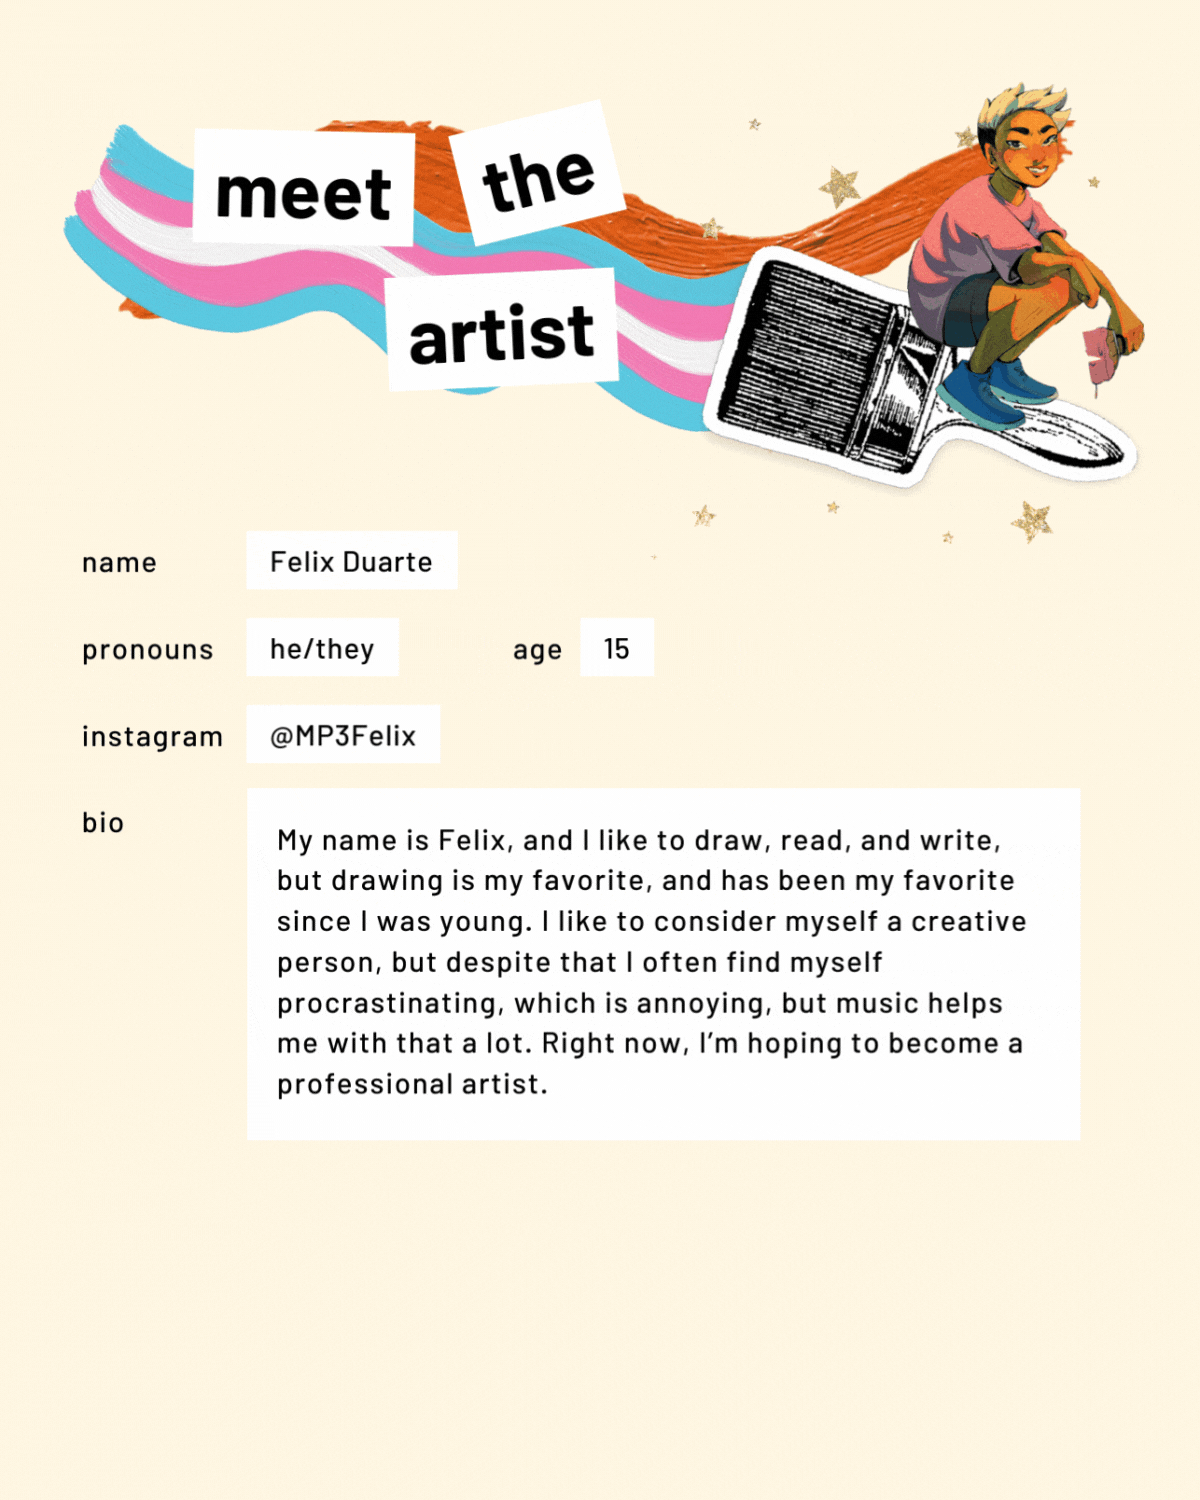 Meet the artist page with an illustration. Name: Felix Duarte. Pronouns: he/they. Age: 15. Instagram:@MP3Felix. Bio: My name is Felix, and I like to draw, read, and write, but drawing is my favorite, and has been my favorite since I was young. I like to consider myself a creative person, but despite that I often find myself procrastinating, which is annoying, but music helps me with that a lot. Right now, I’m hoping to become a professional artist.